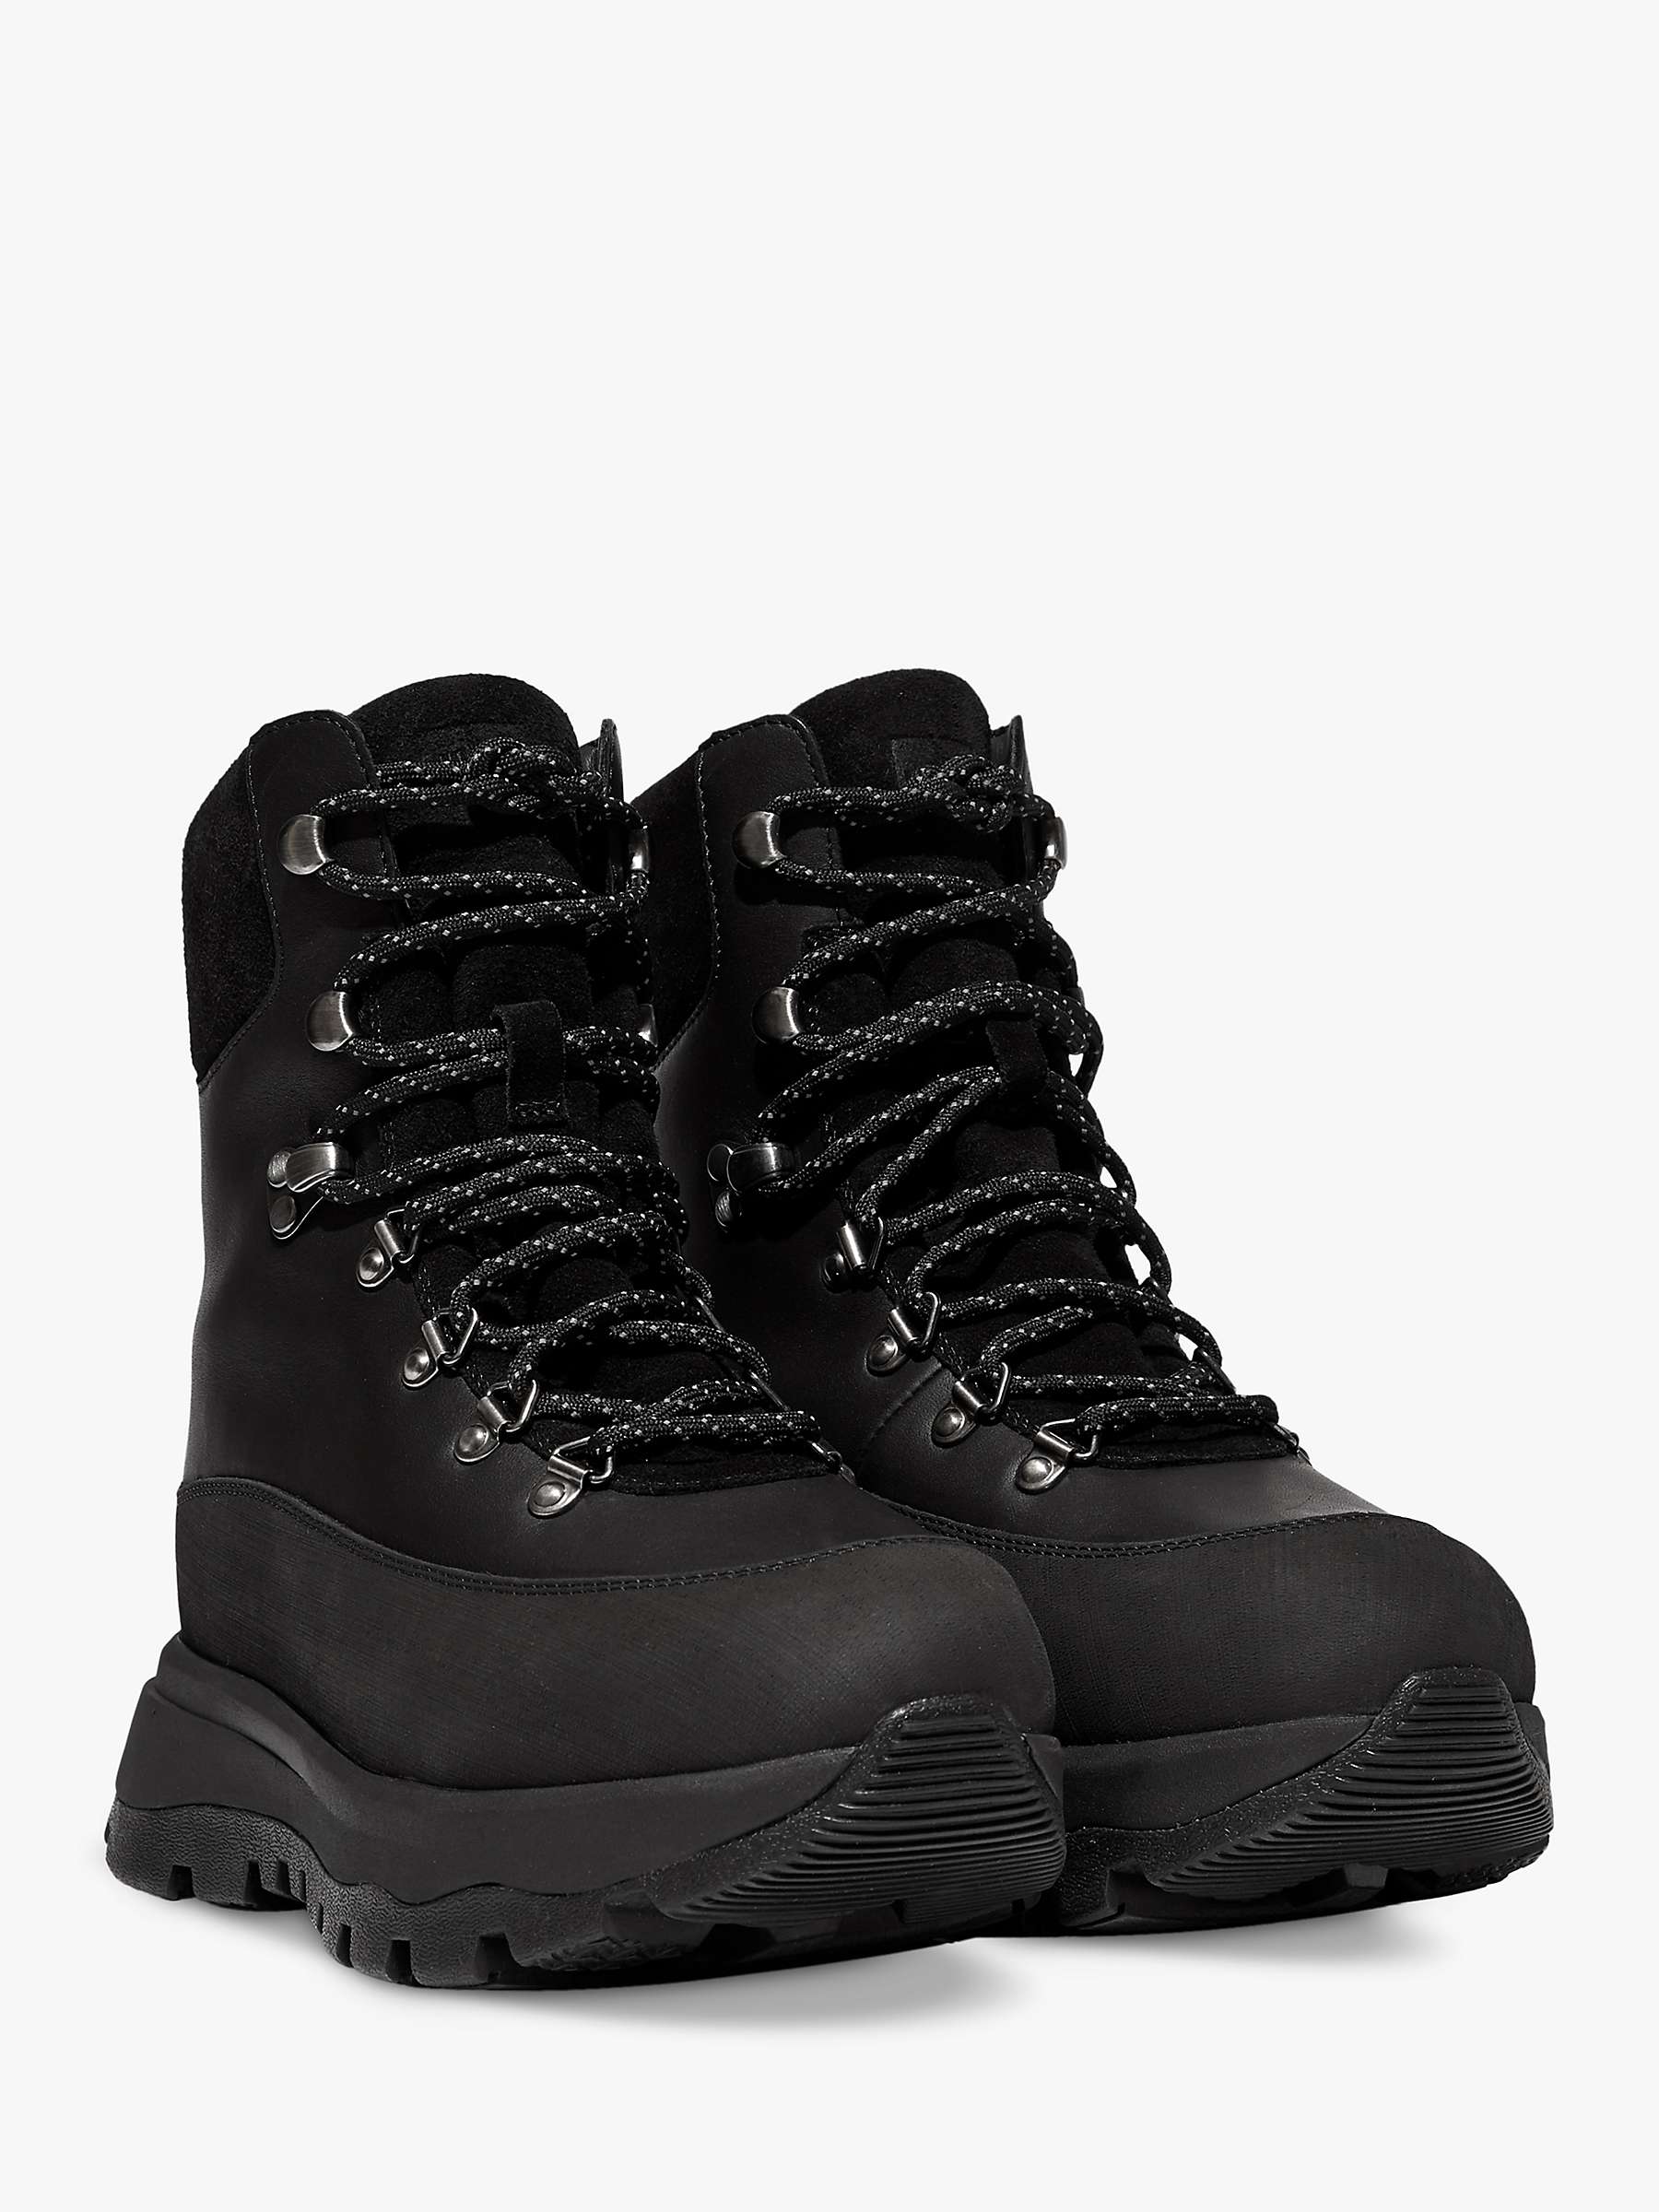 Buy FitFlop Neo-D-Hyker Leather Blend Walking Boots Online at johnlewis.com